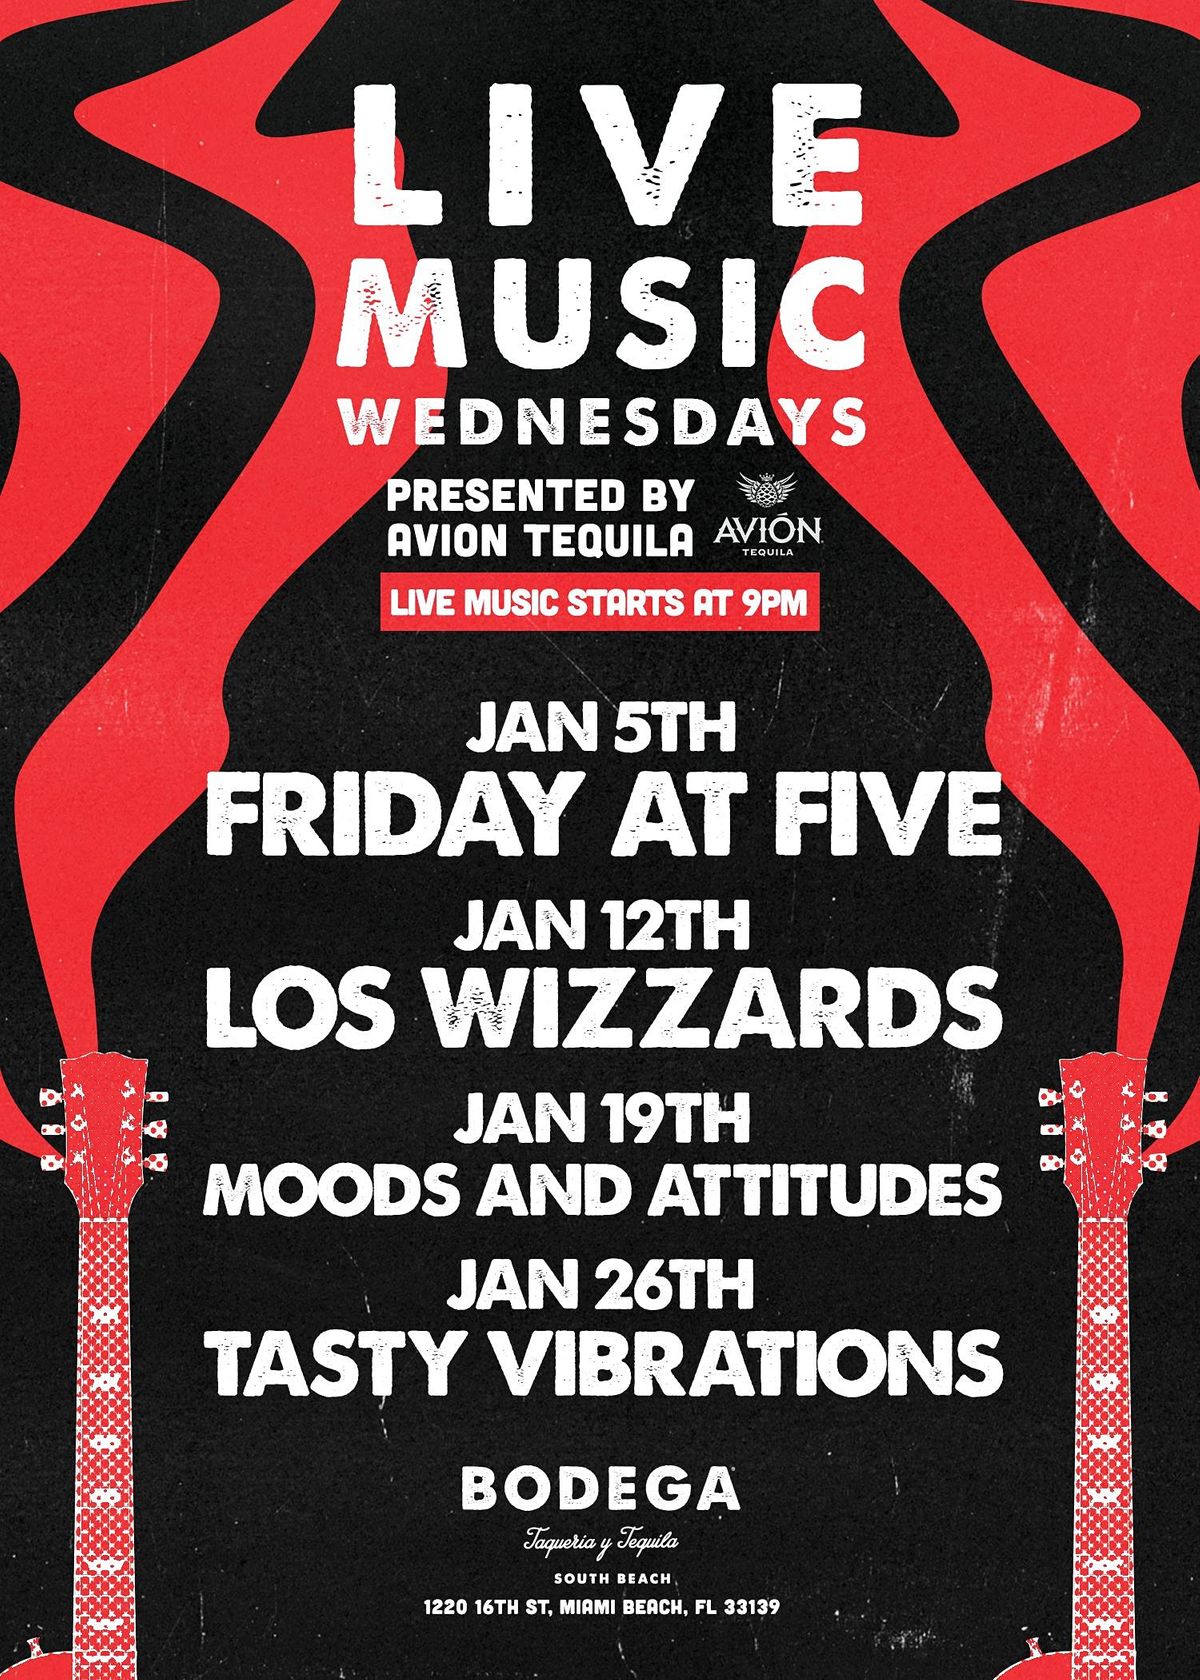 Live Music Wednesdays with Moods and Attitudes